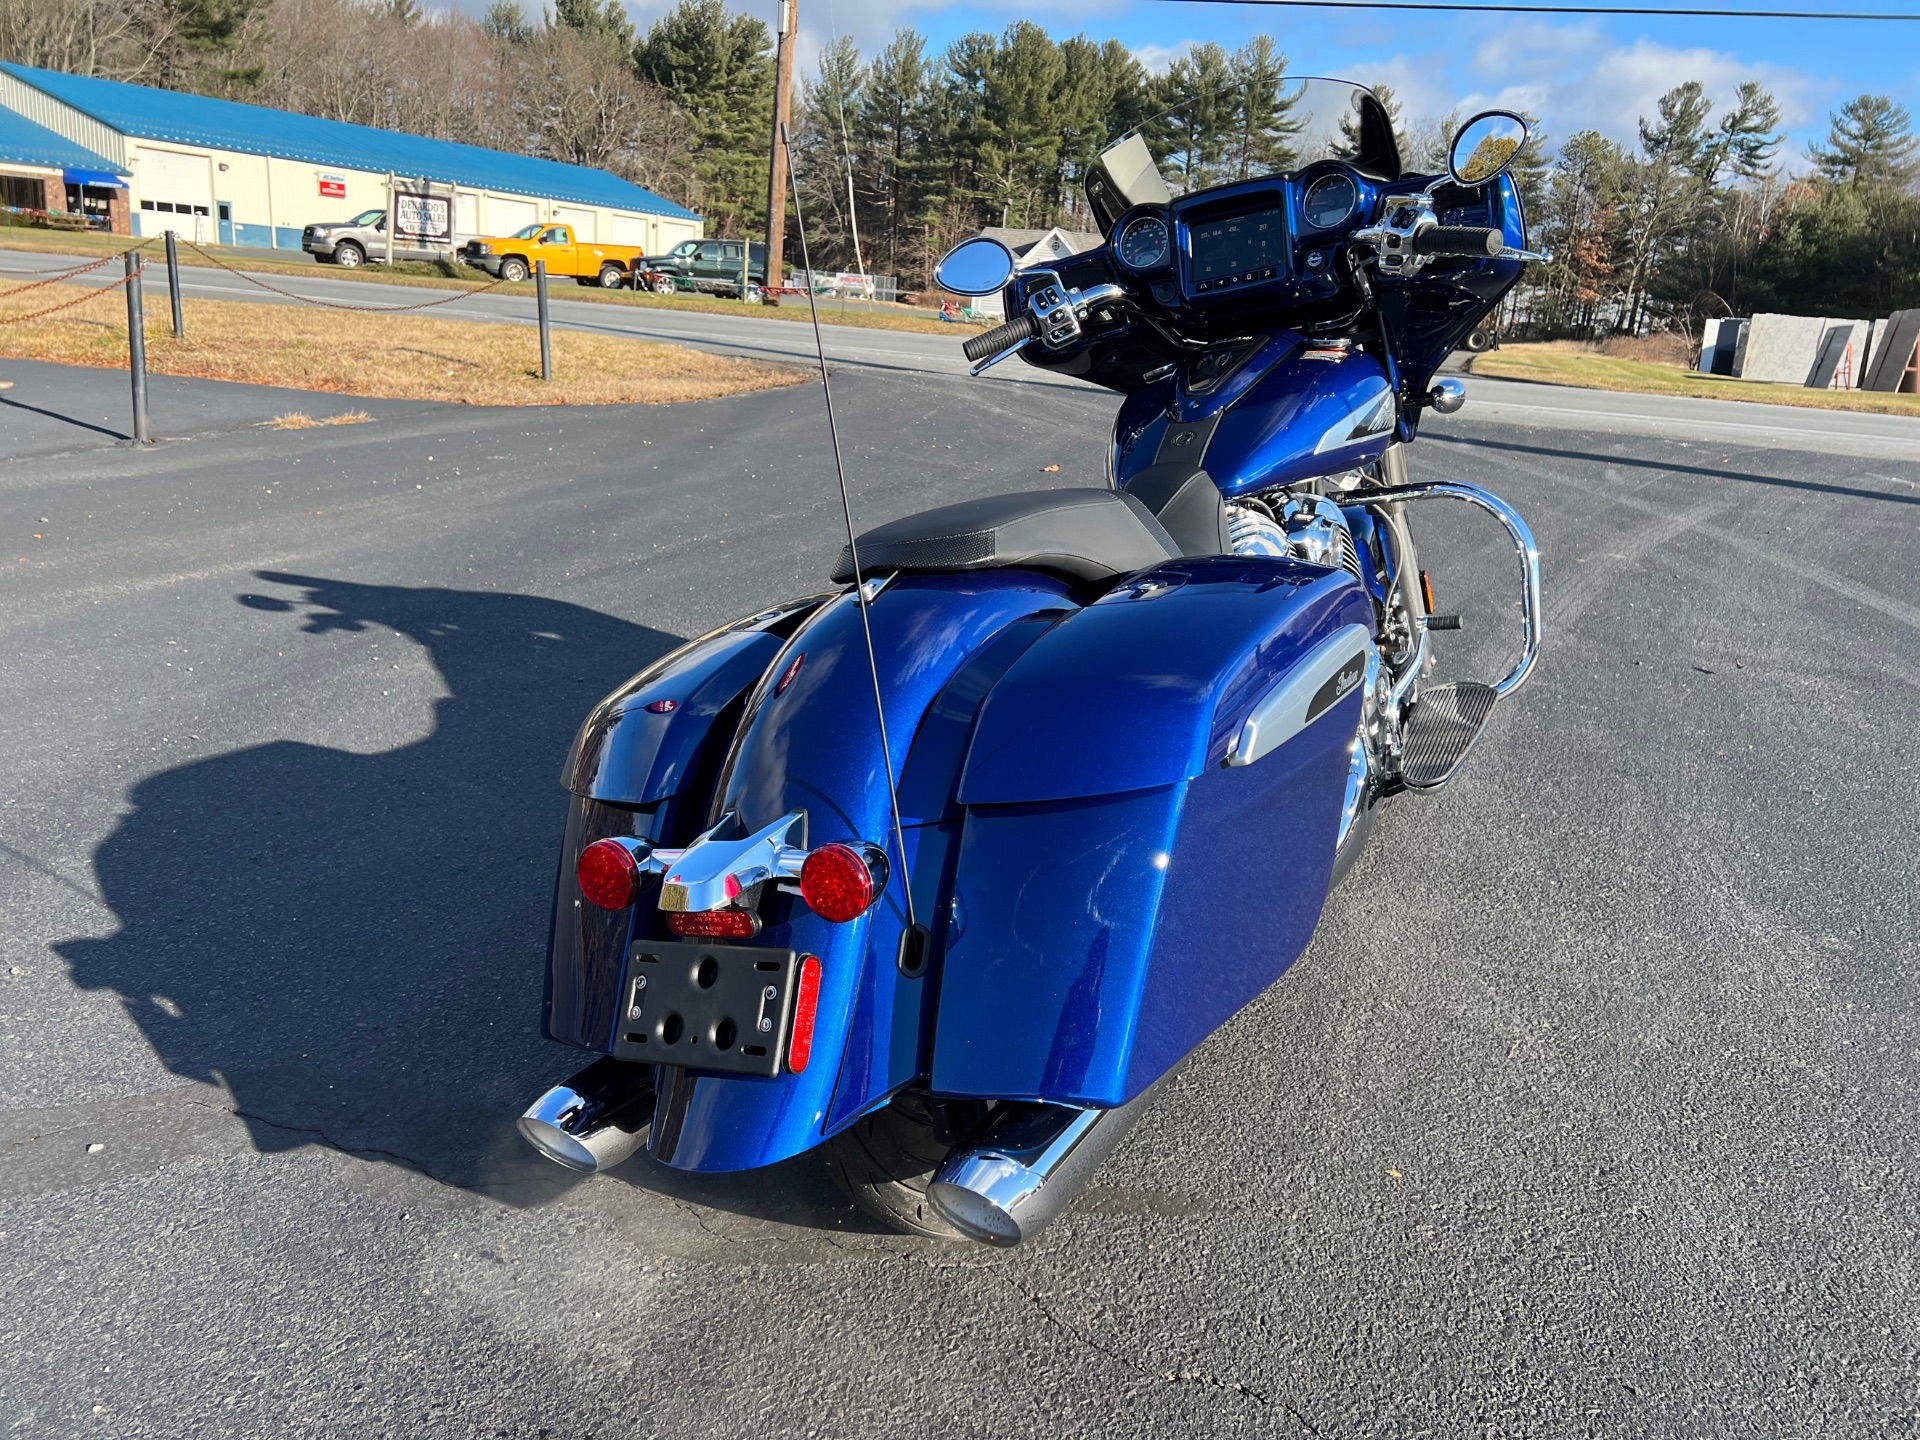 2022 Indian Chieftain® Limited in Westfield, Massachusetts - Photo 9